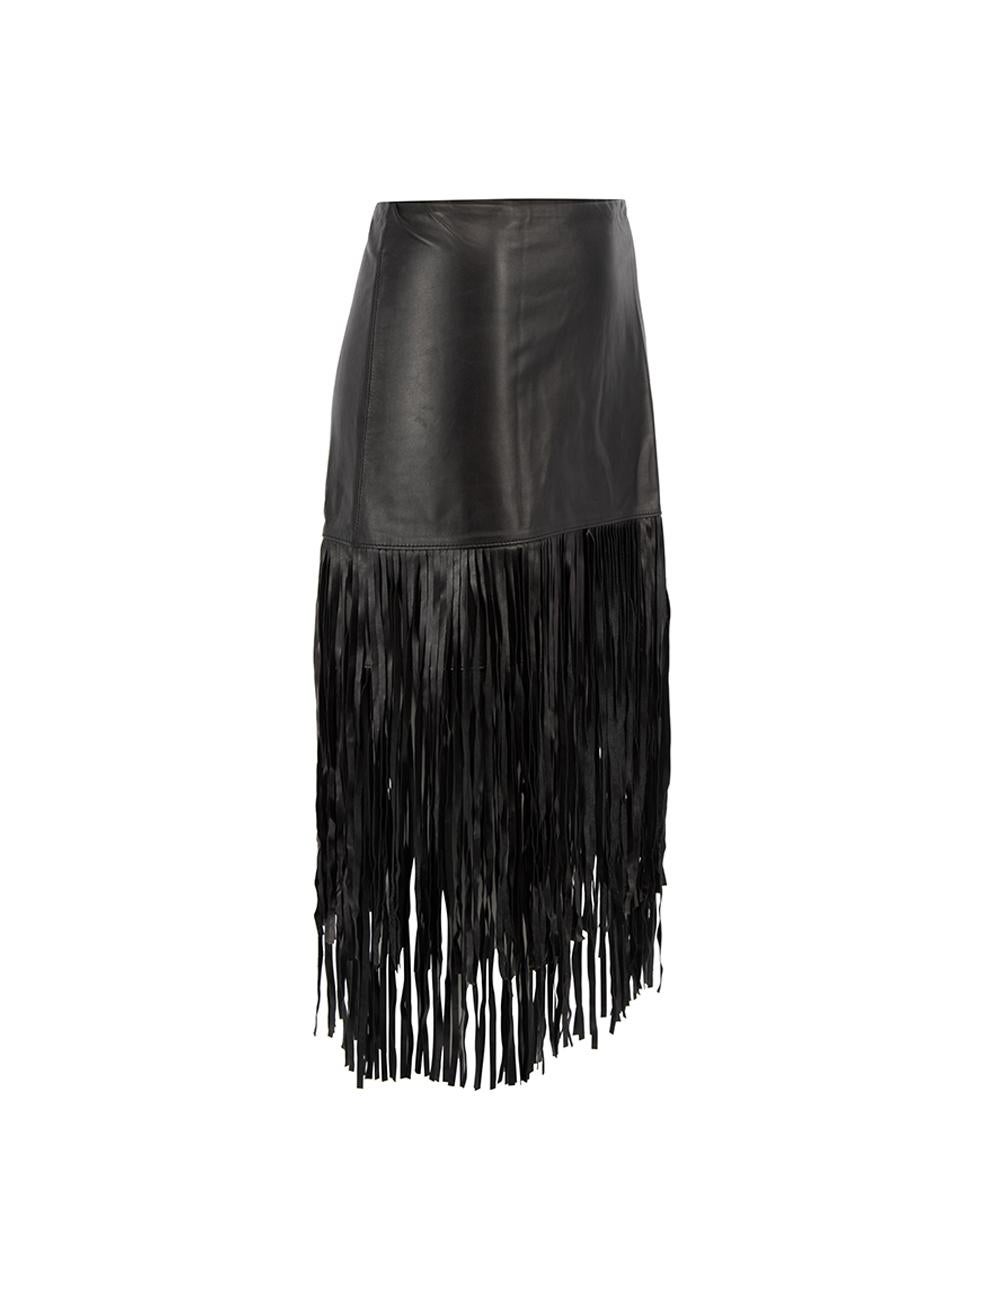 CONDITION is Very good. Minimal wear to skirt is evident. Minimal wear to the leather exterior on this used Alice + Olivia designer resale item.   Details  Black Leather Mini skirt Two layers of tassels from hemline Back zip closure with hook and